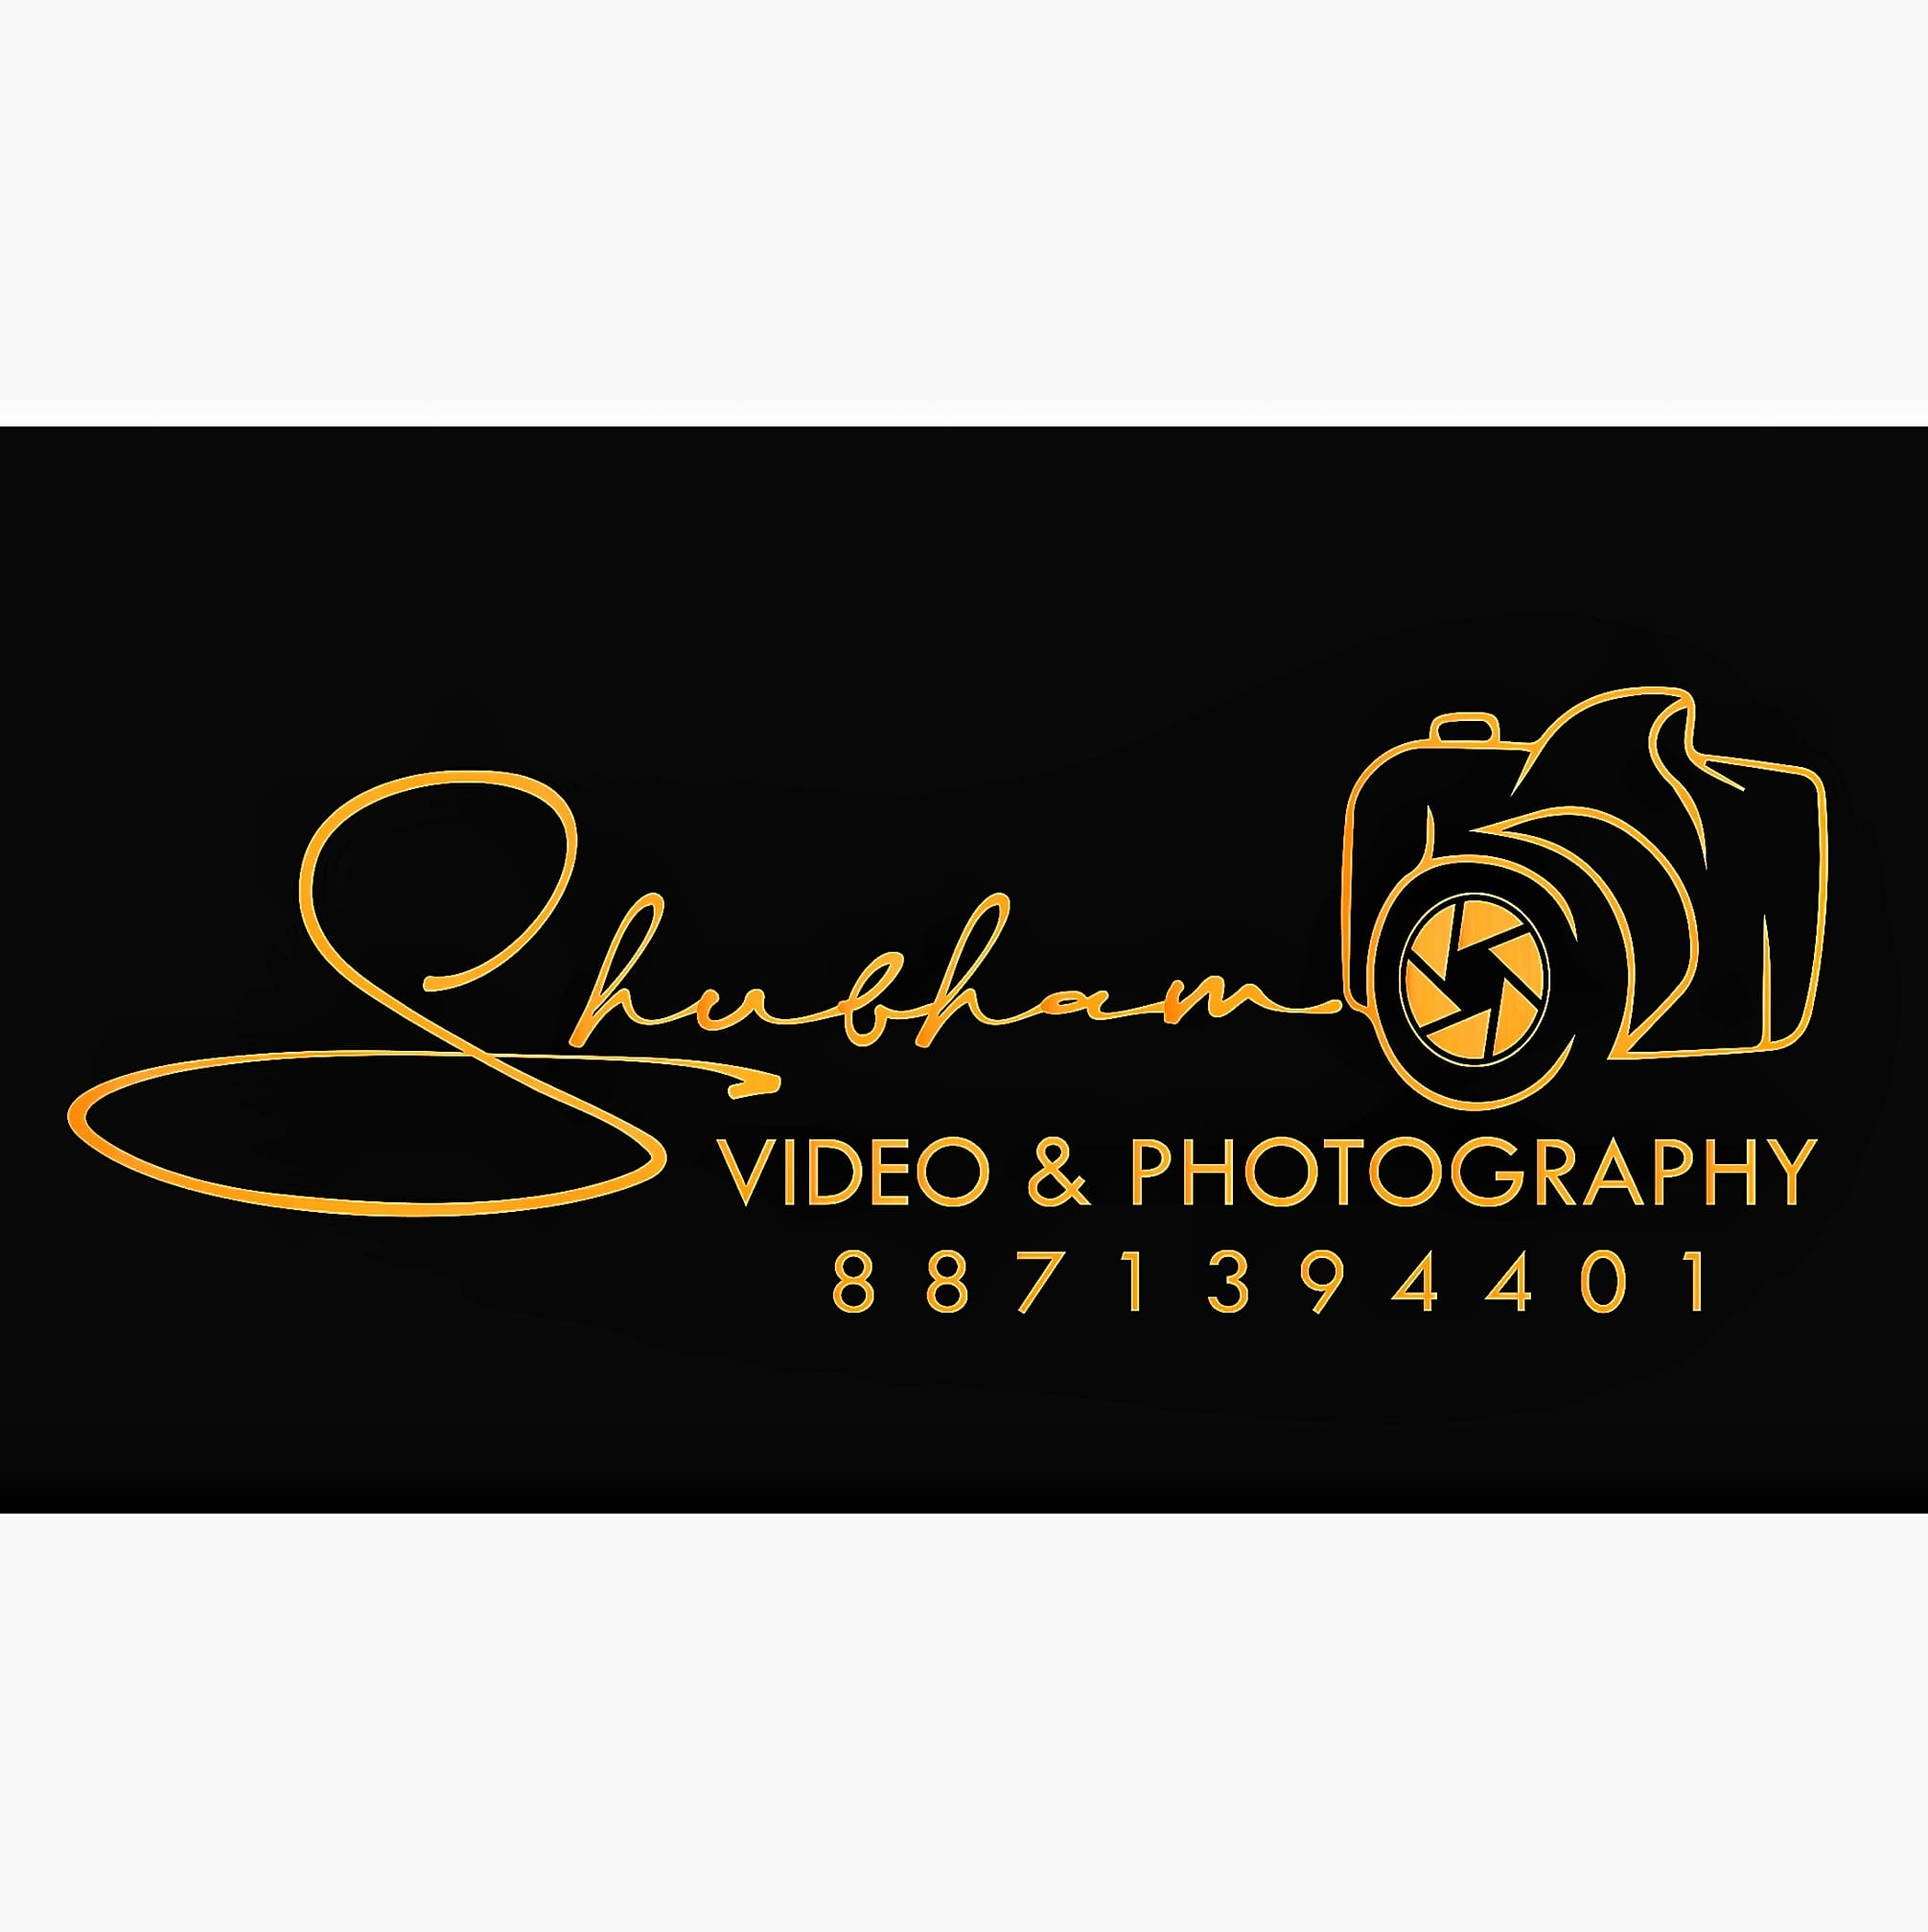 shubham video and photography|Photographer|Event Services